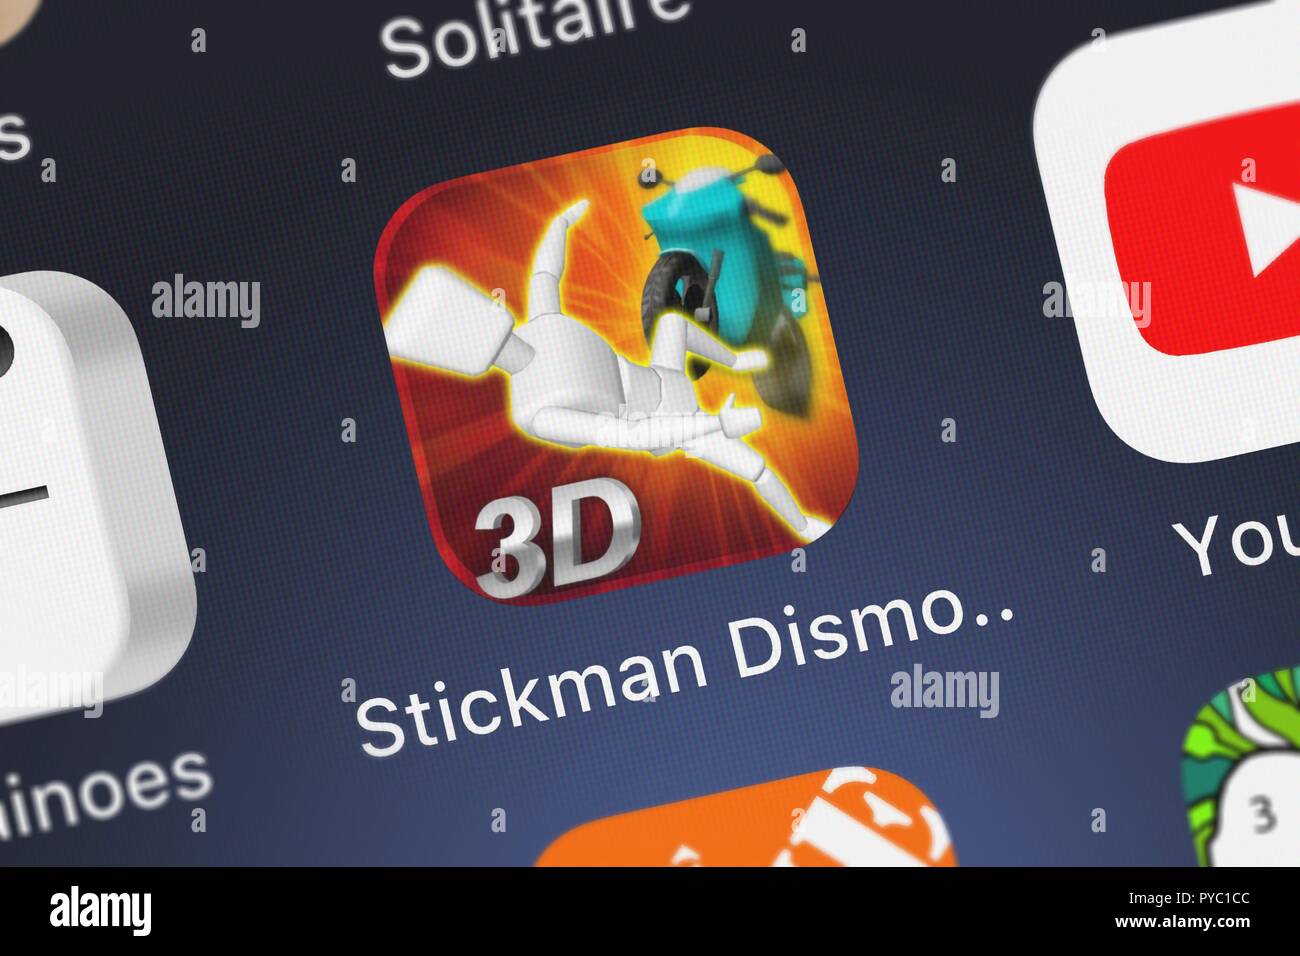 London, United Kingdom - October 26, 2018: Screenshot of the Stickman Dismounting 3D mobile app from Le Van Trong icon on an iPhone. Stock Photo